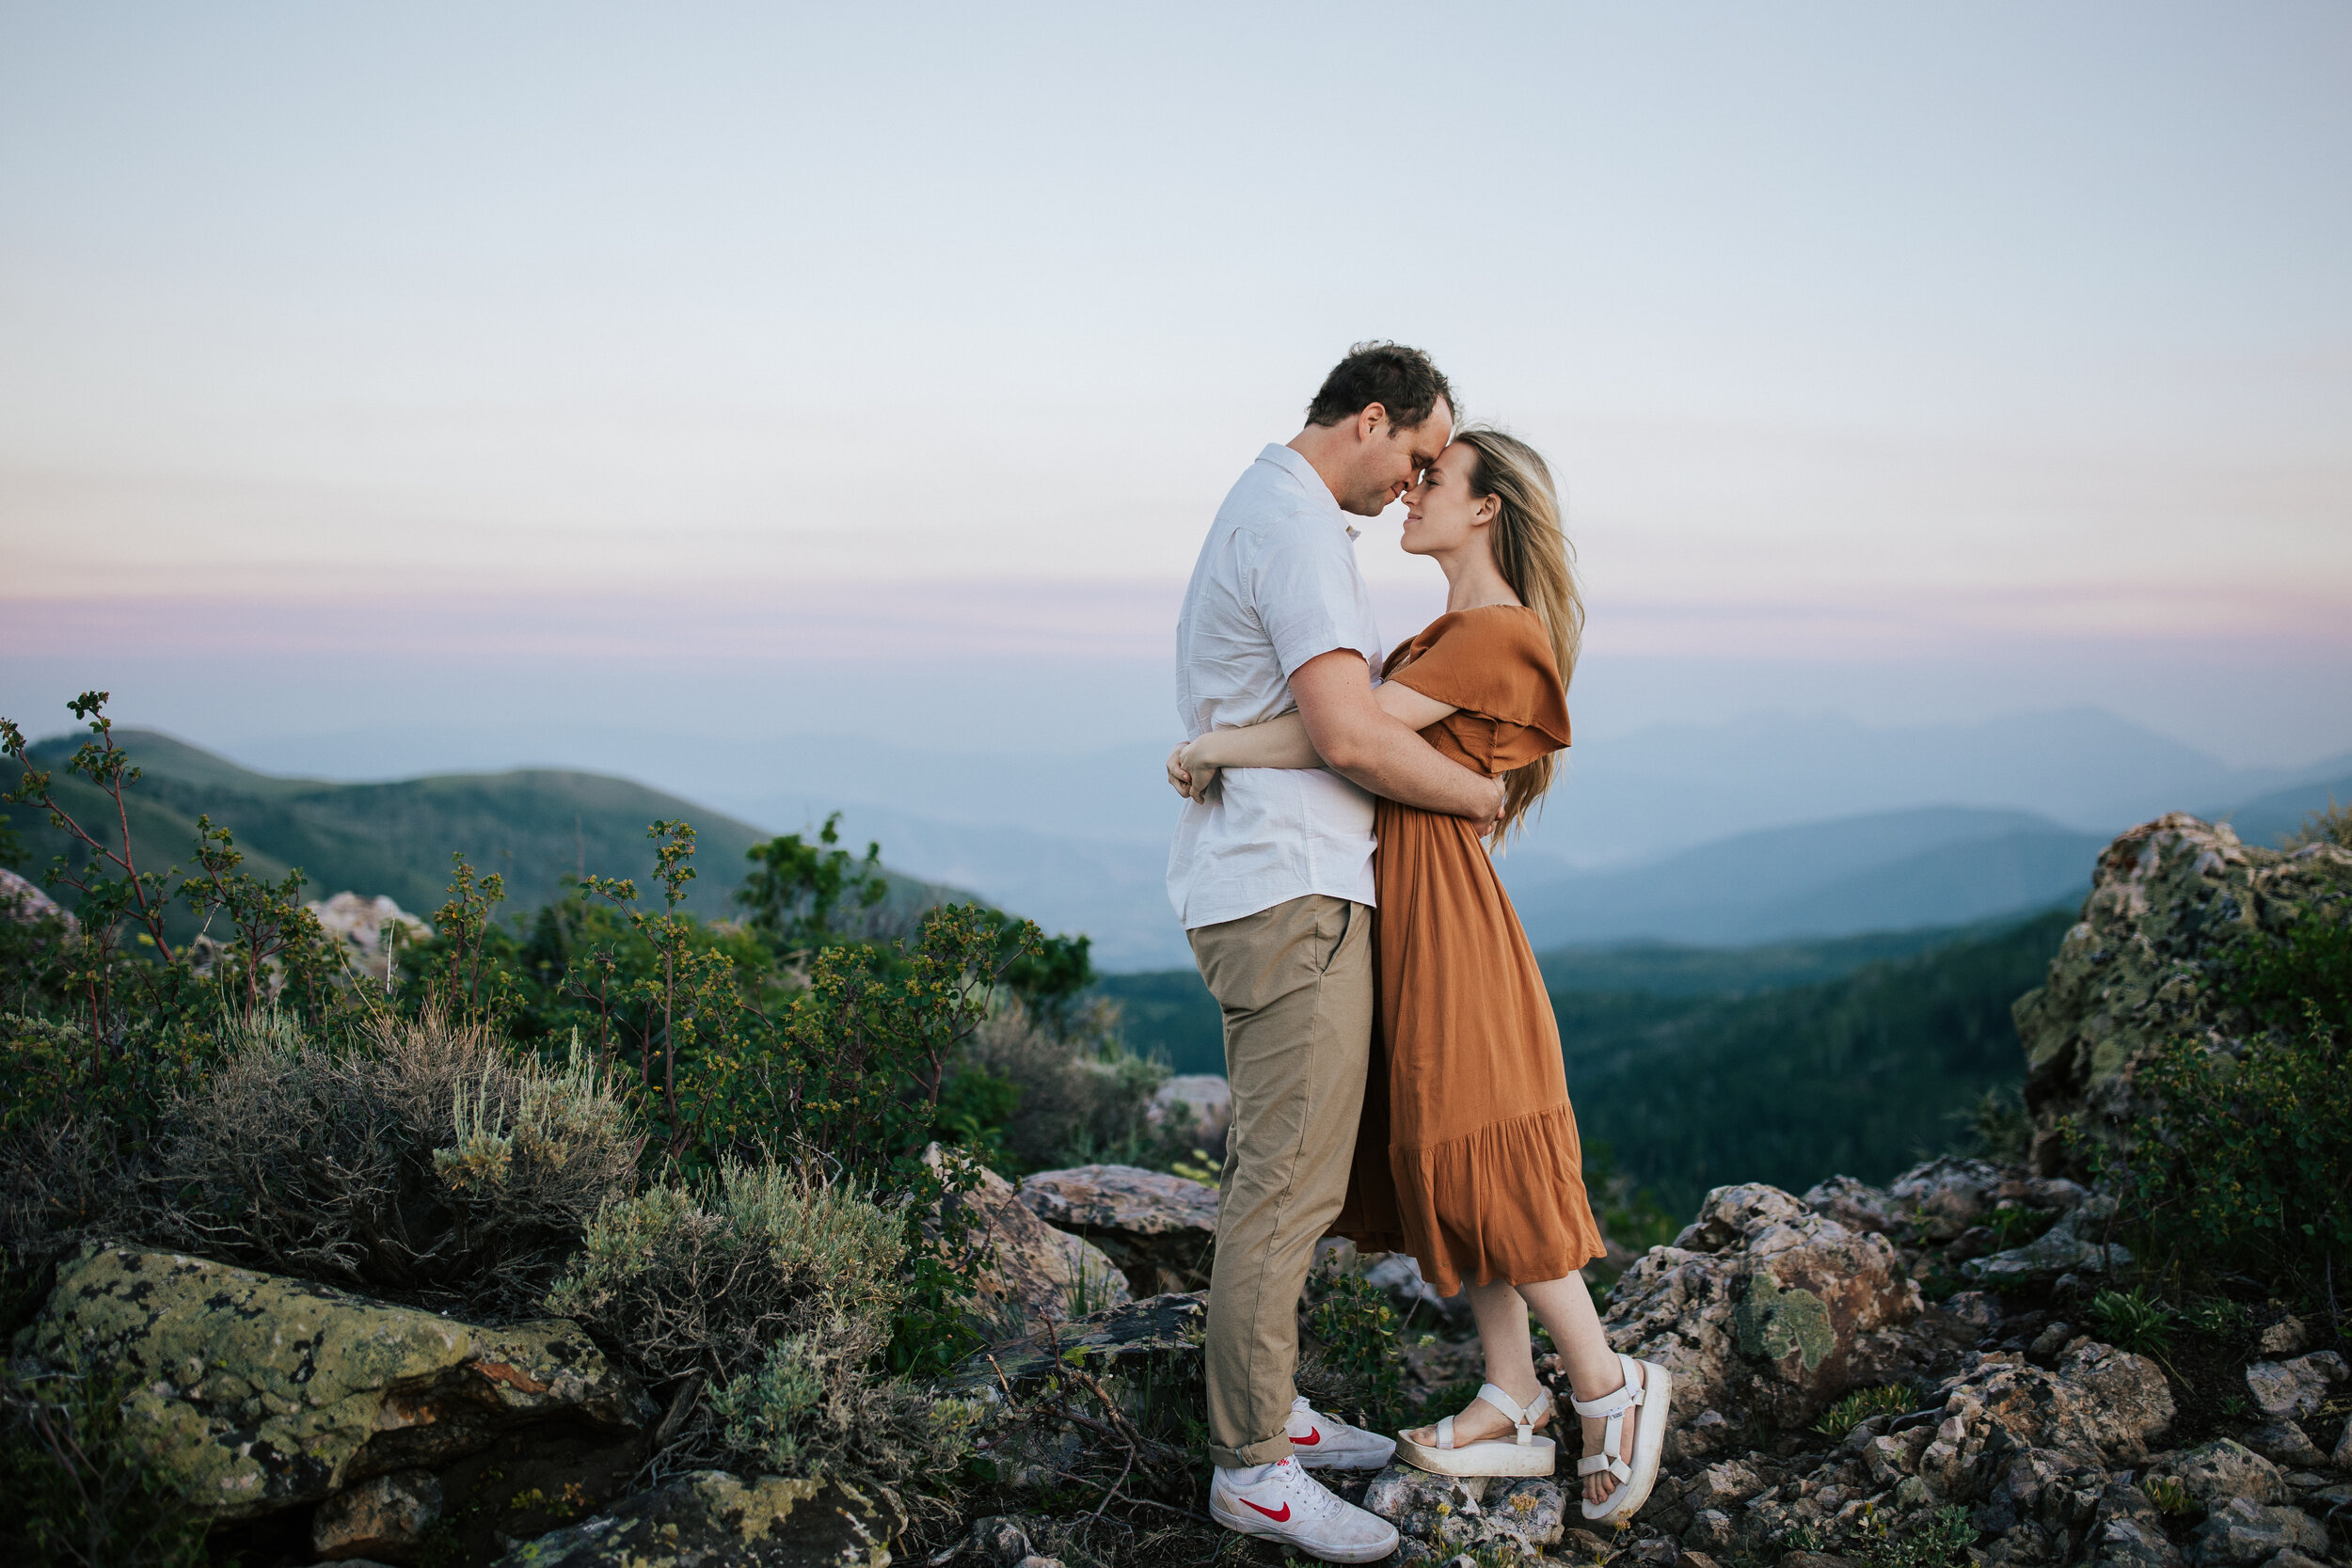  Engagement session in wildflowers in the mountains near Park City, Utah. Summertime engagement photos with mountain views. Engaged couple hug in the mountains. Outfit inspo. Romantic engagement session. Engagement outfits. #engagementphotos #engagem